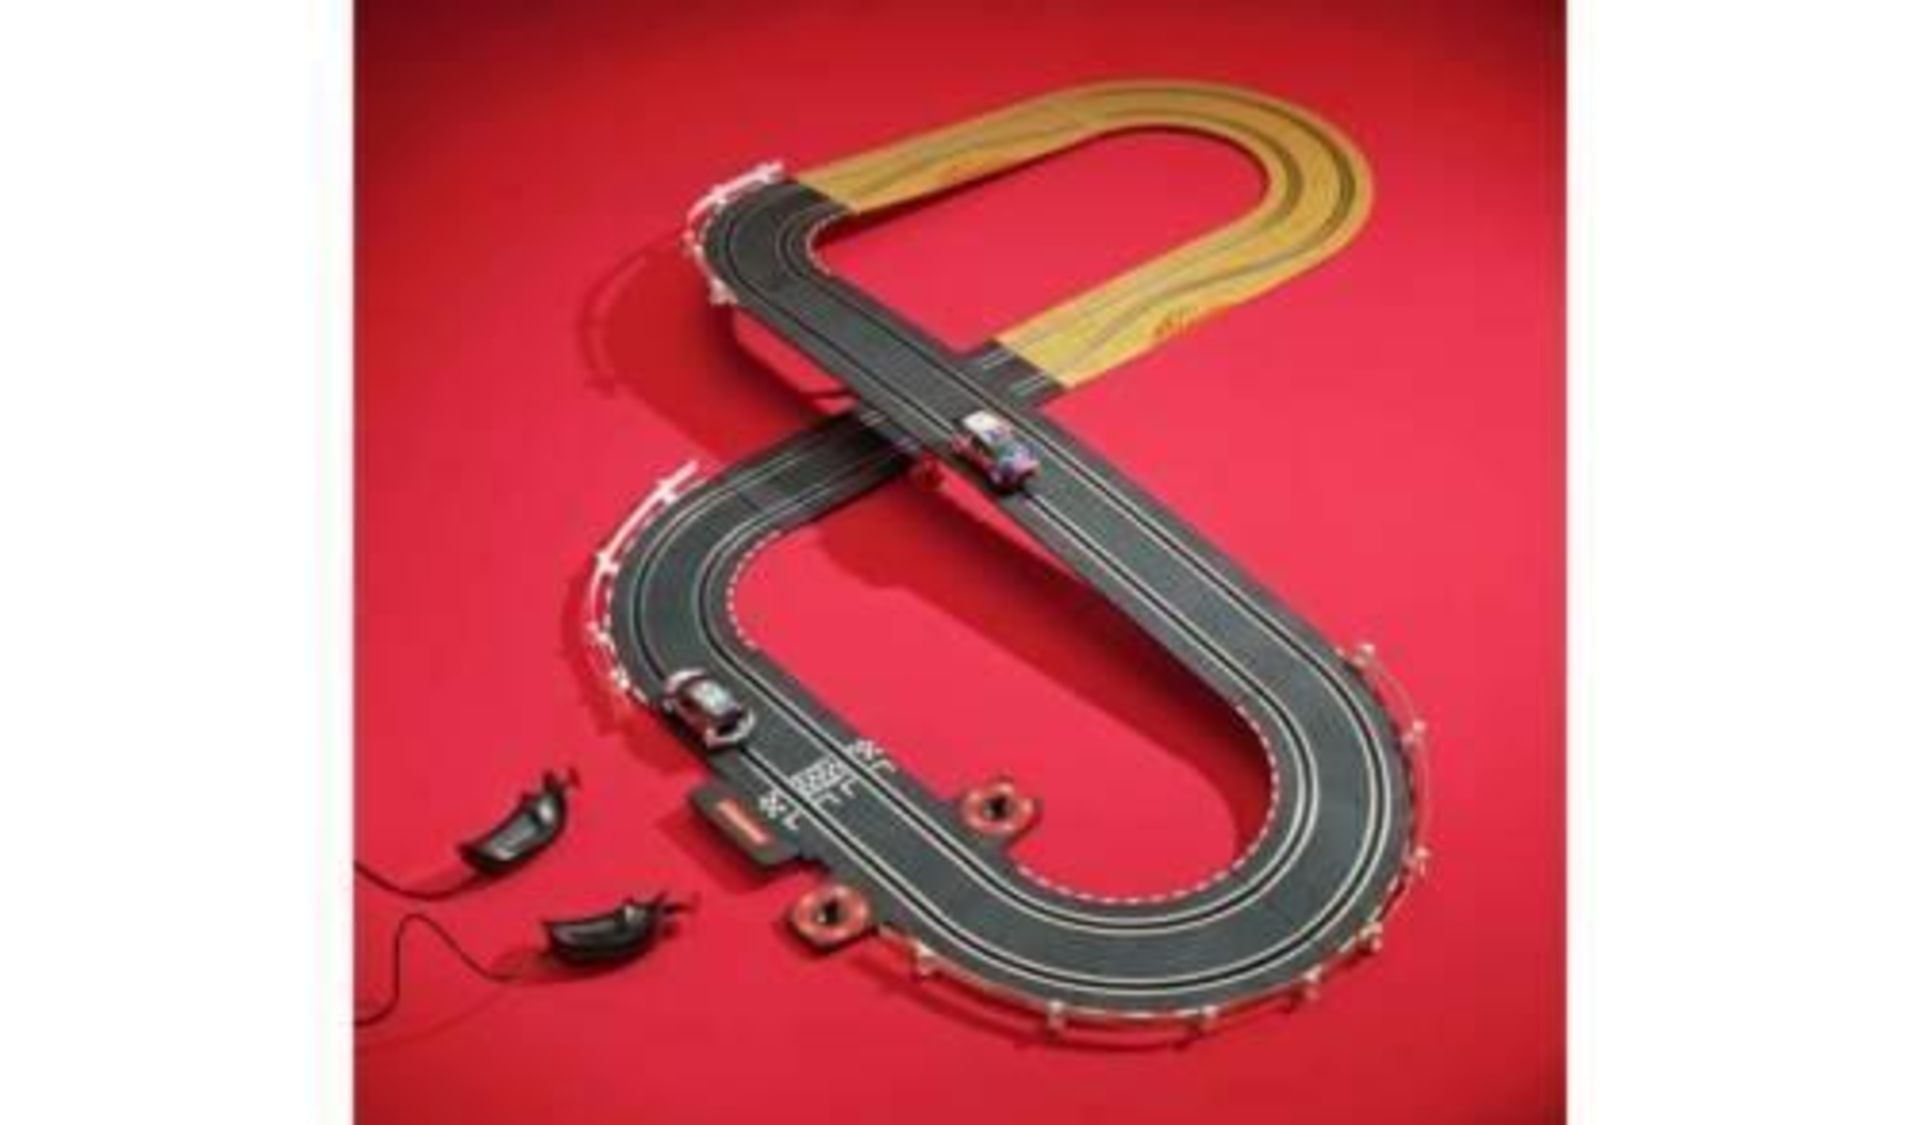 Carrera Rally Up Electric Track Set (931/2579) - £60.00 RRP